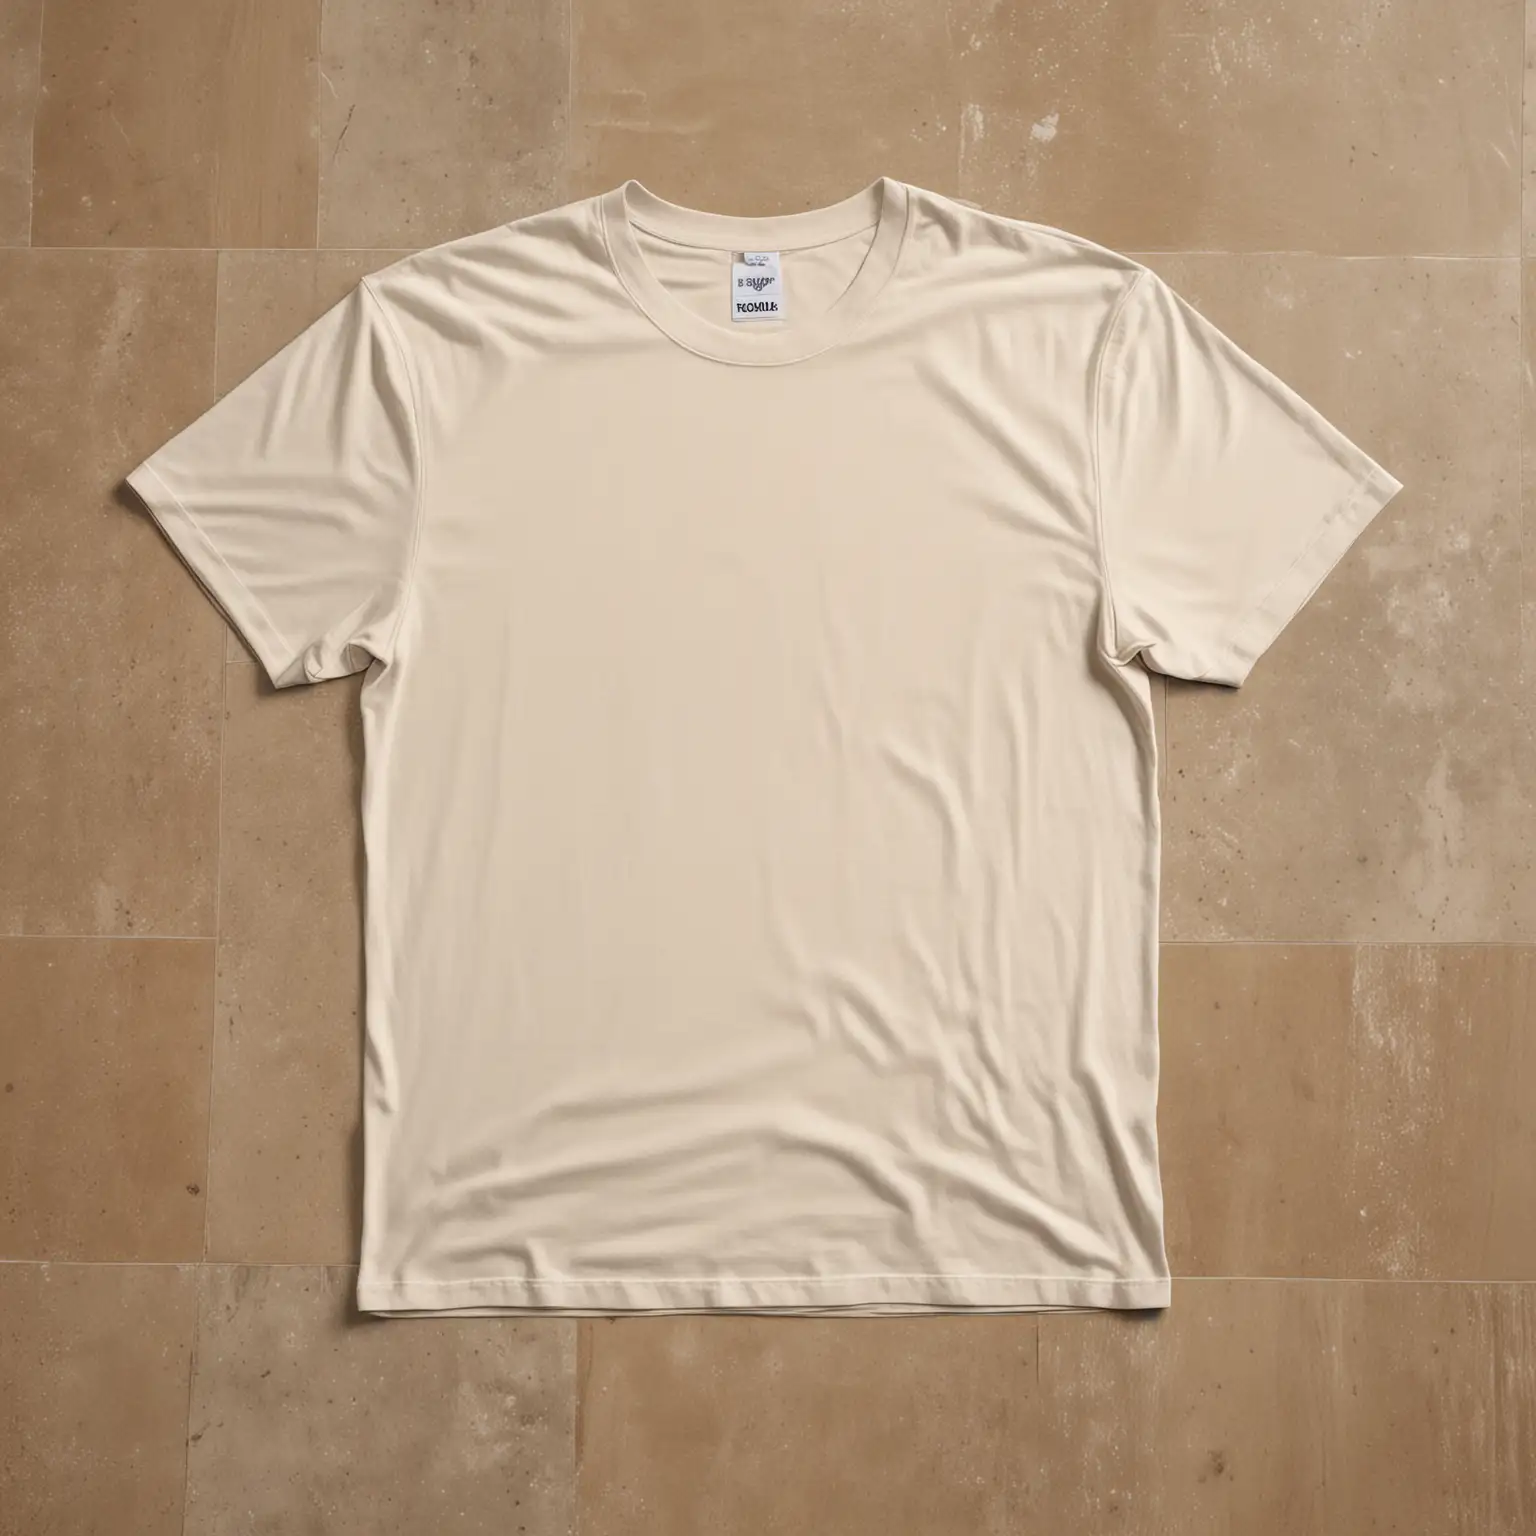 HYPER REALISTIC ironed simmetrical proportional 100% cotton bella canvas 3001 natural tshirt no wrinkles, lied on floor seen from above with solid contrasting background floor